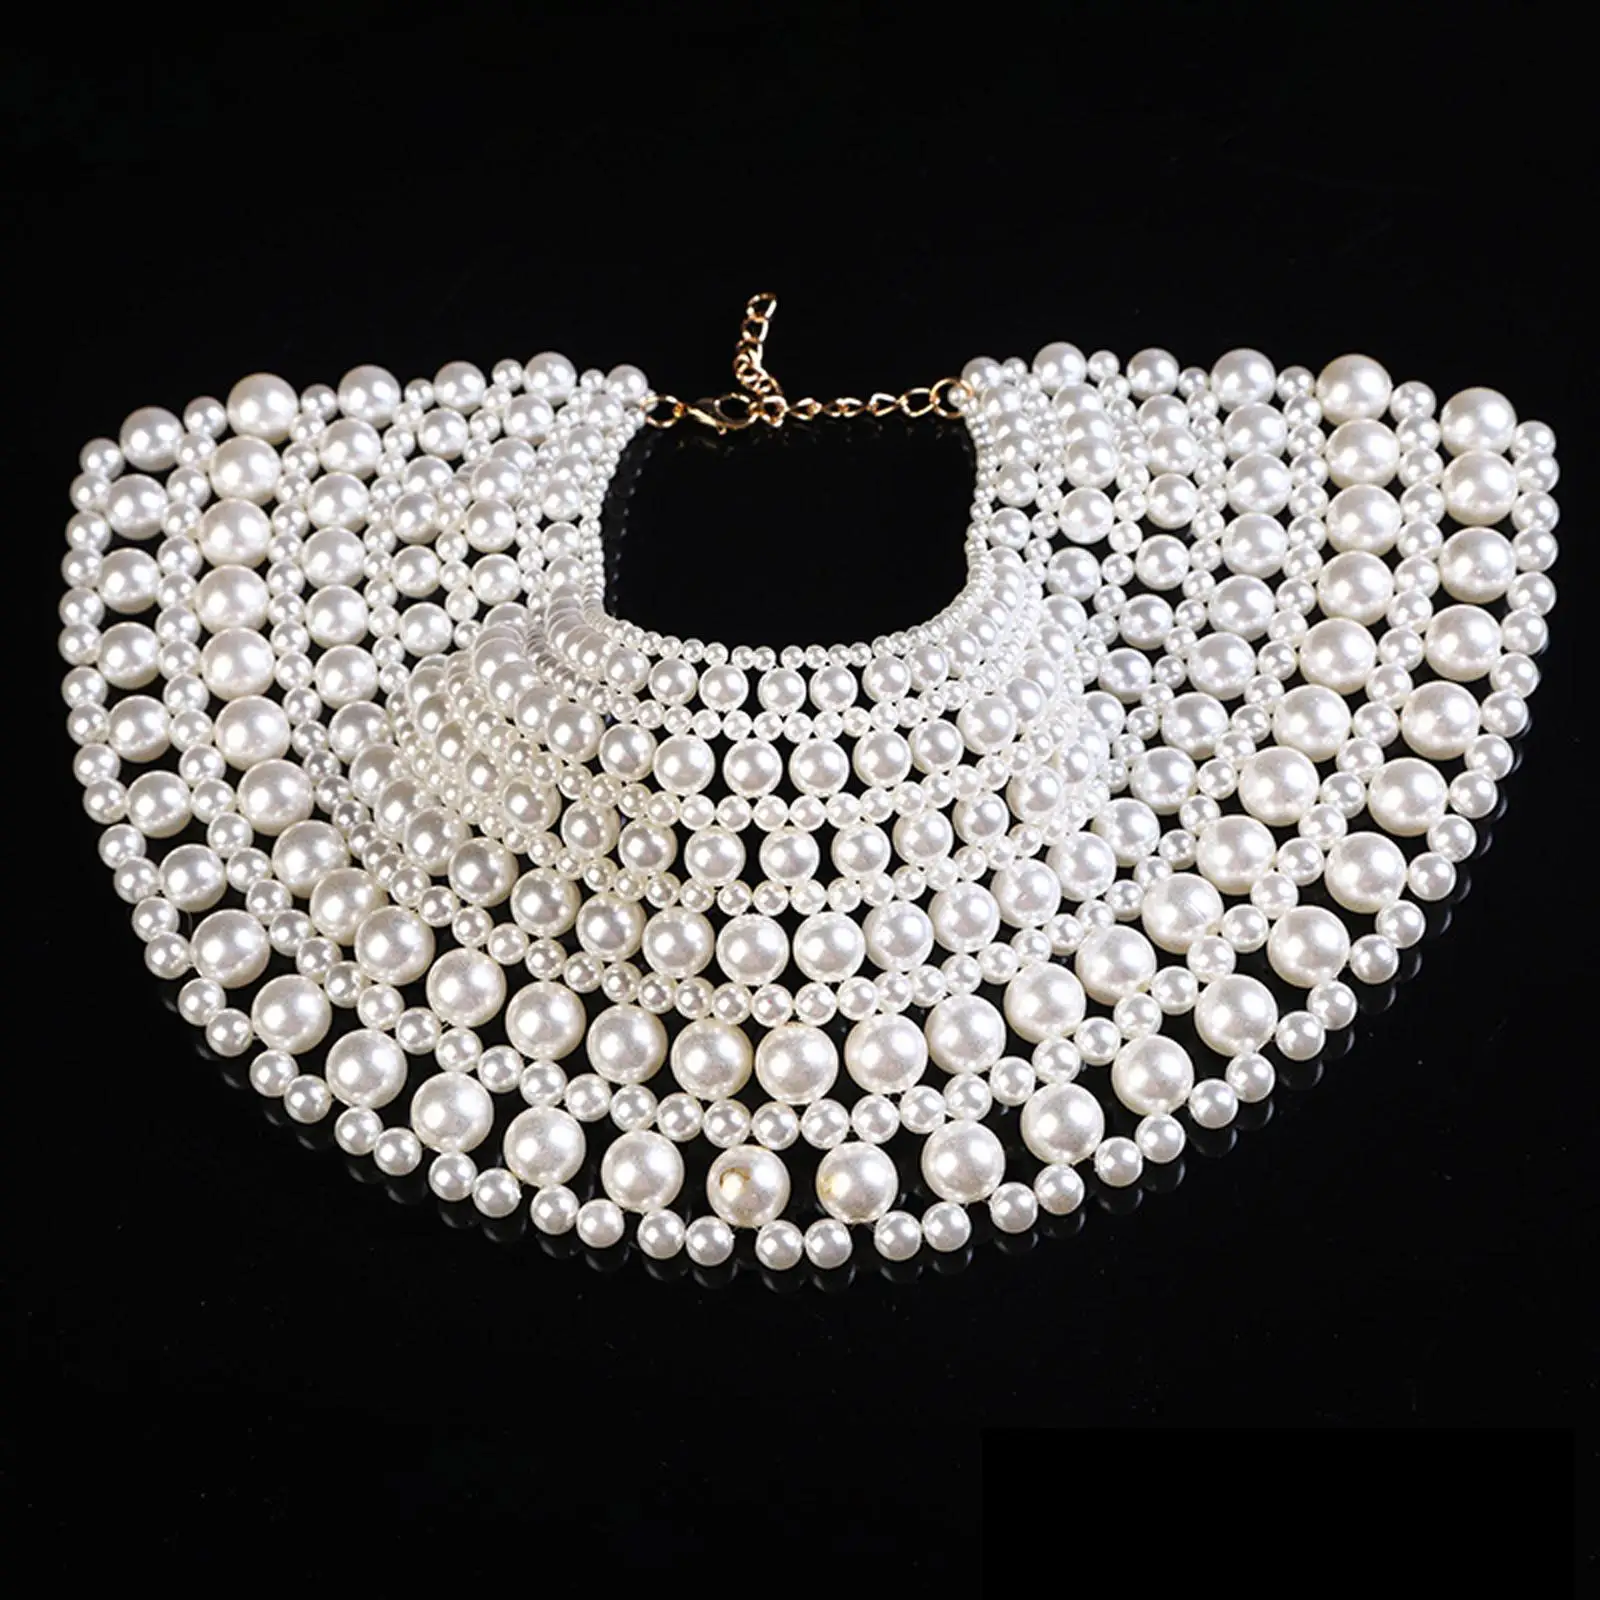 Vintage Multi Layer Imitation Pearl Necklace Adjustable for Mom/Wife/Sister